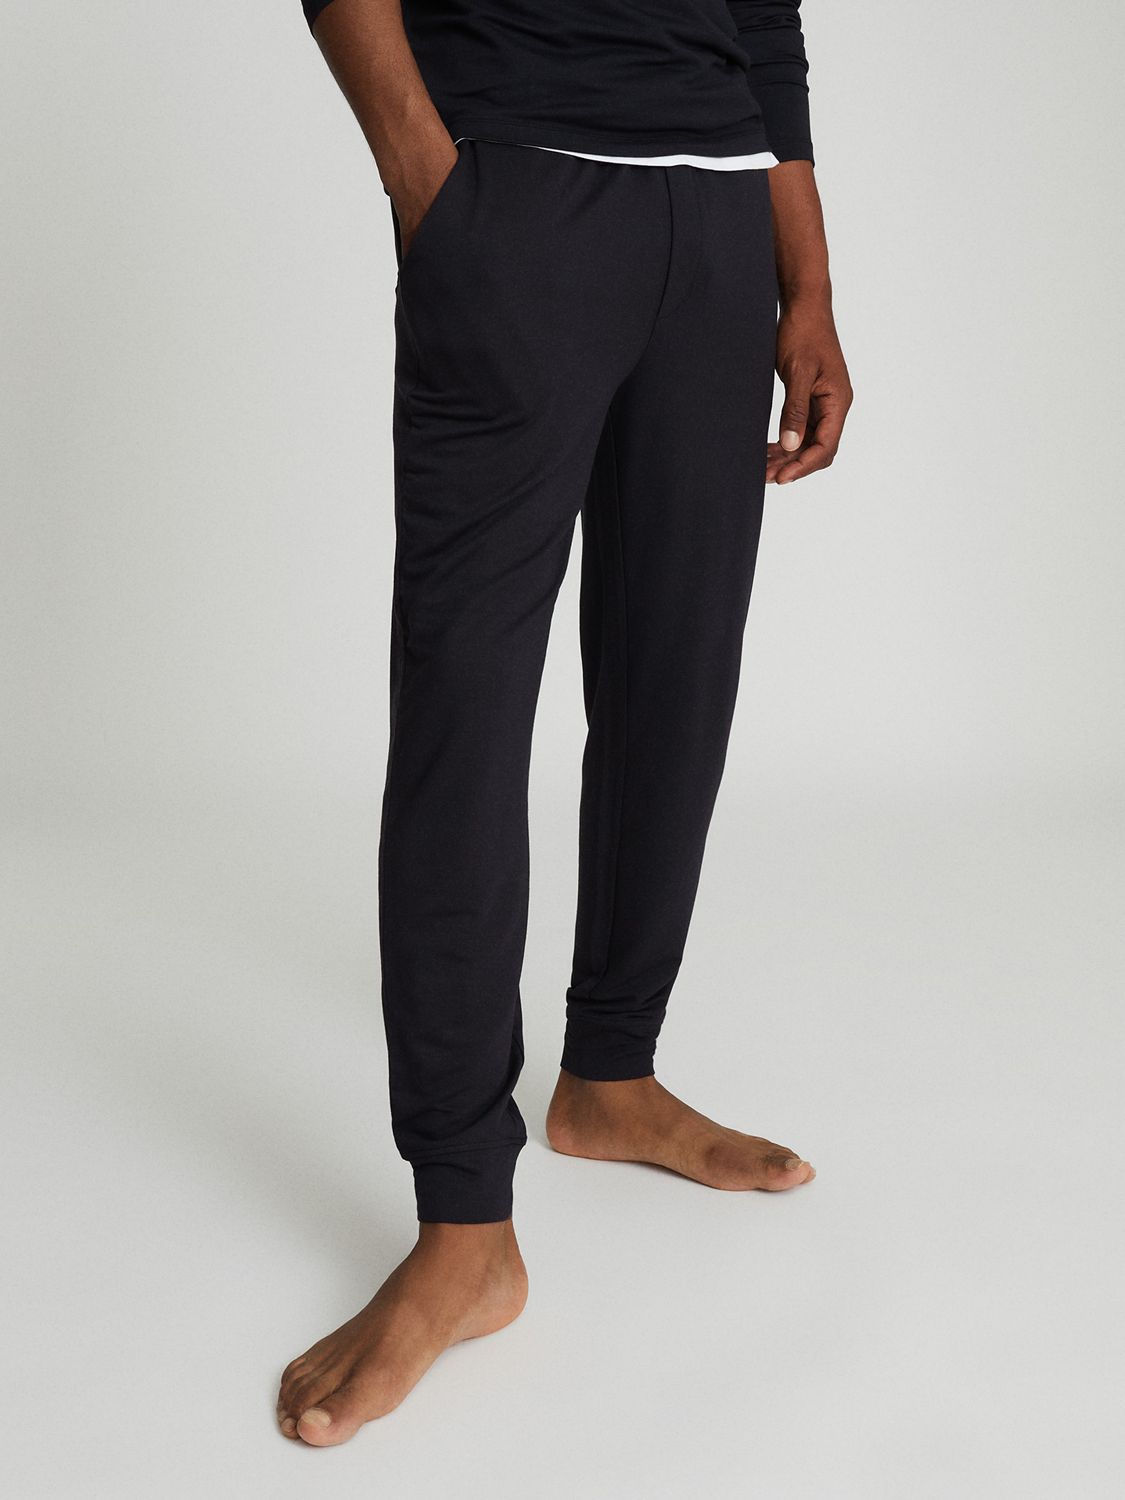 Reiss Ward Jersey Joggers, Charcoal at John Lewis & Partners